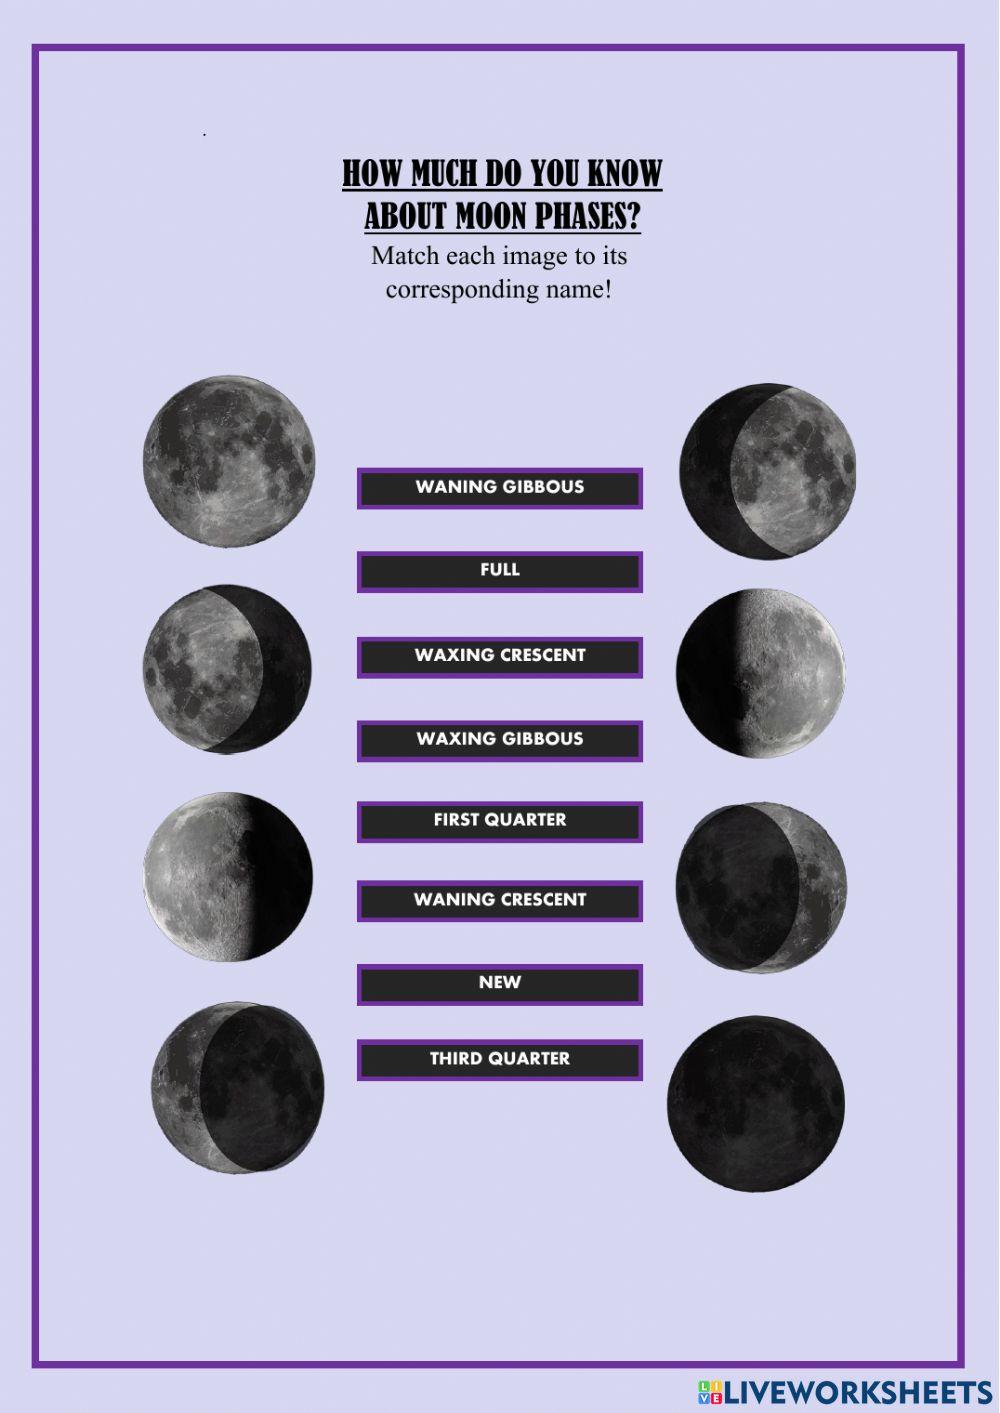 Moon Phases.Join with arrows